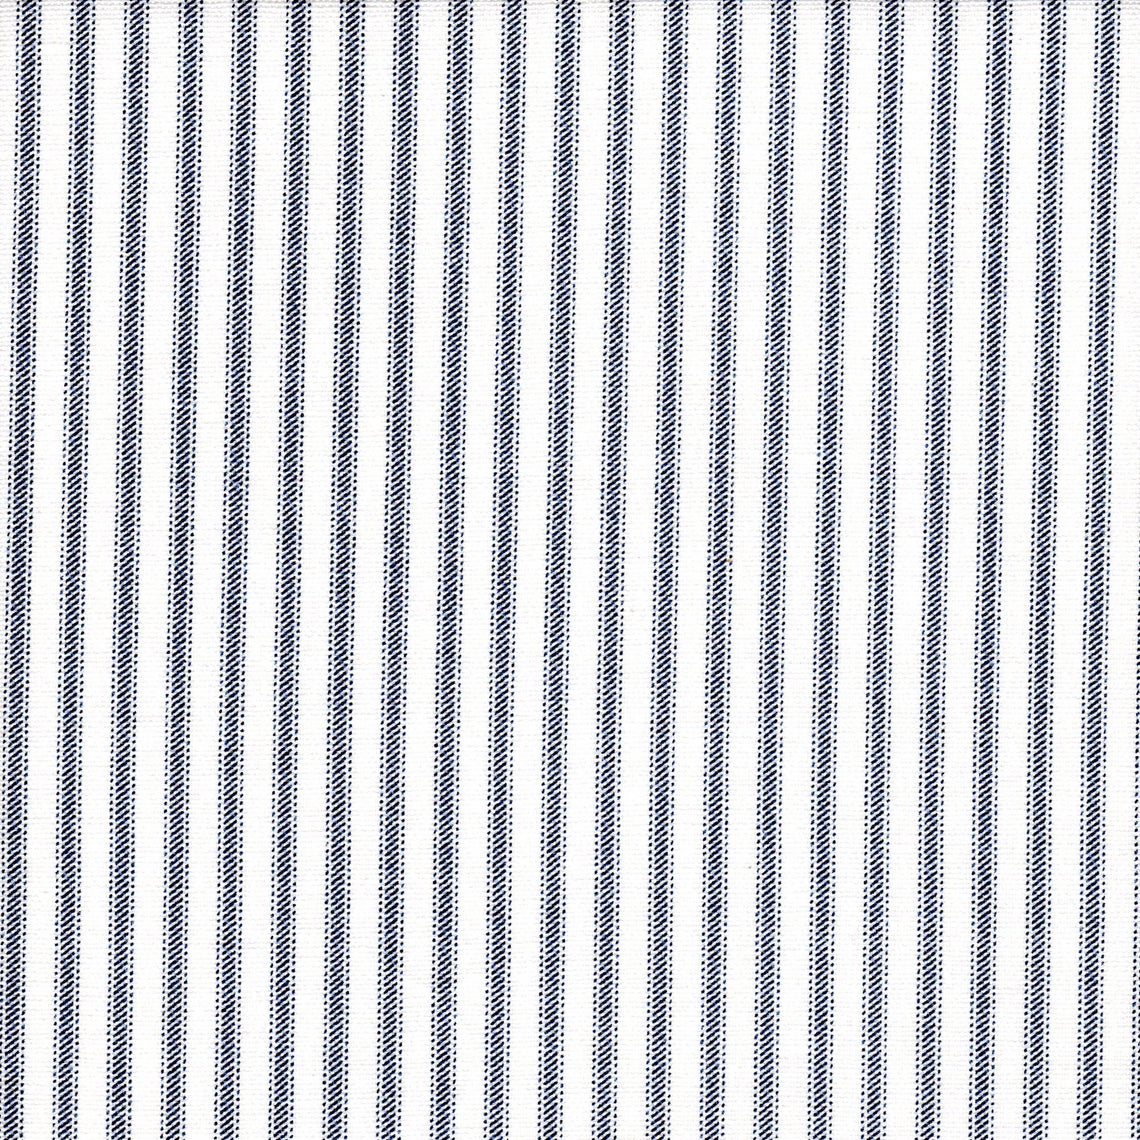 tailored valance in classic navy blue ticking stripe on white